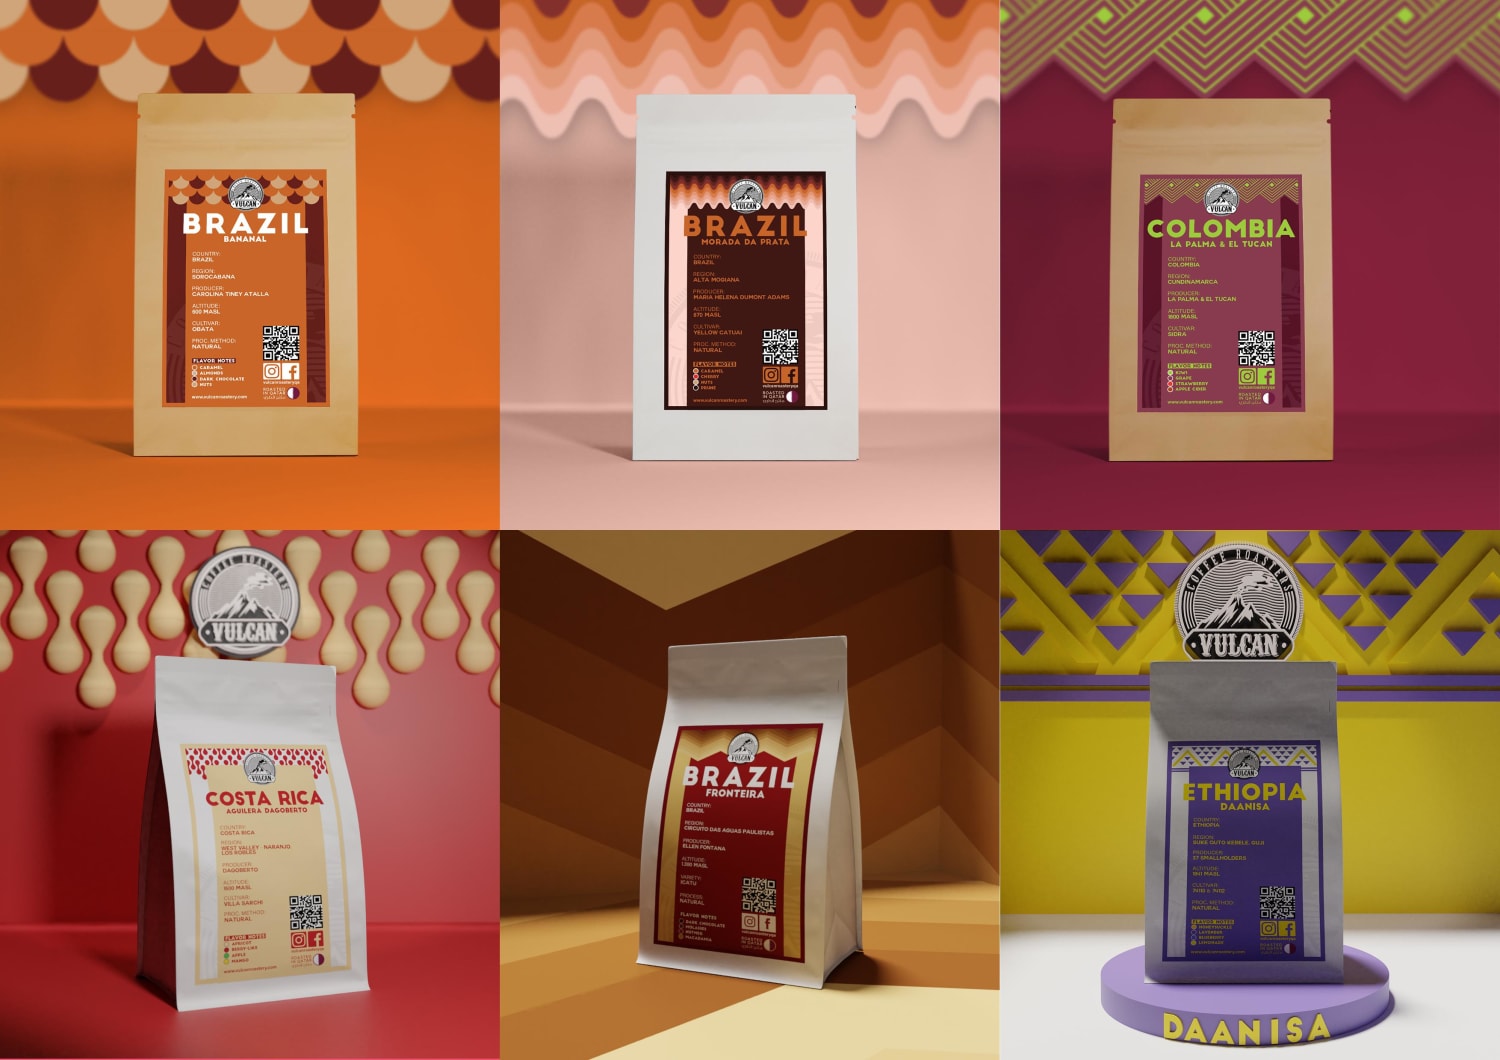 Coffee Packaging Design in my recent company. Hope you like it. Feel free to comment